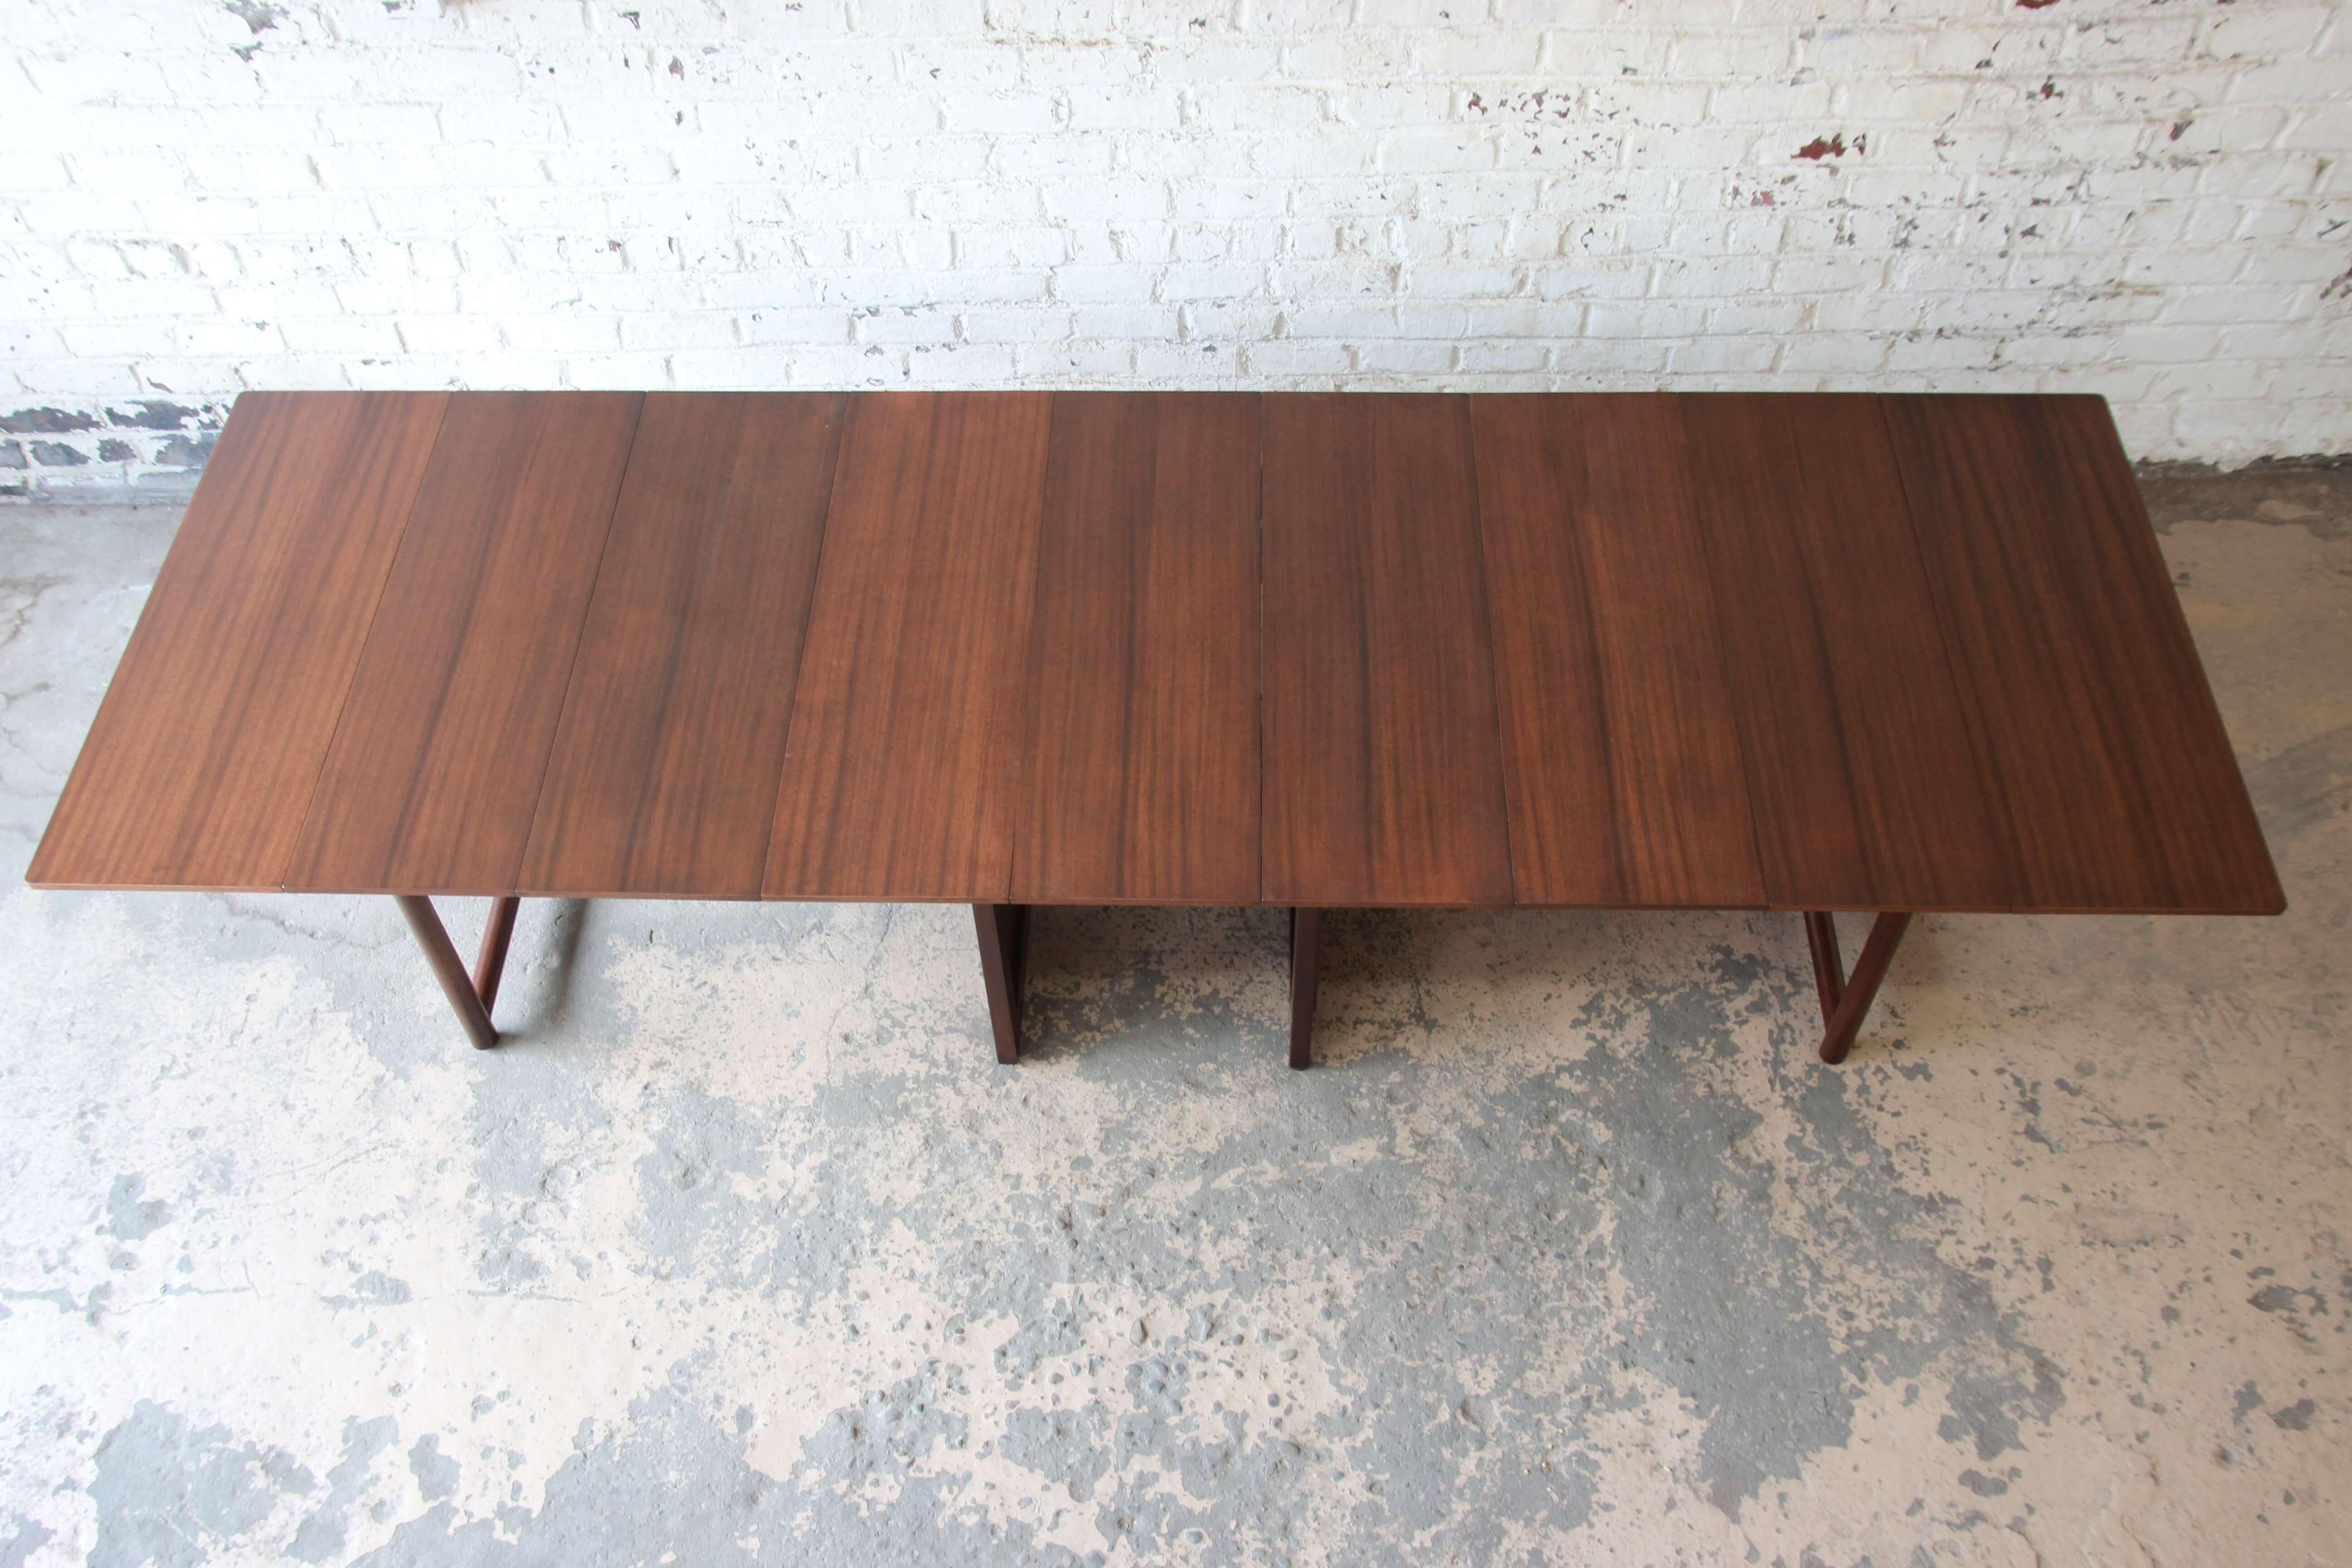 Offering a substantial and amazingly versatile Edward Wormley extension dining table for Dunbar. The table measures at its smallest point 28.5